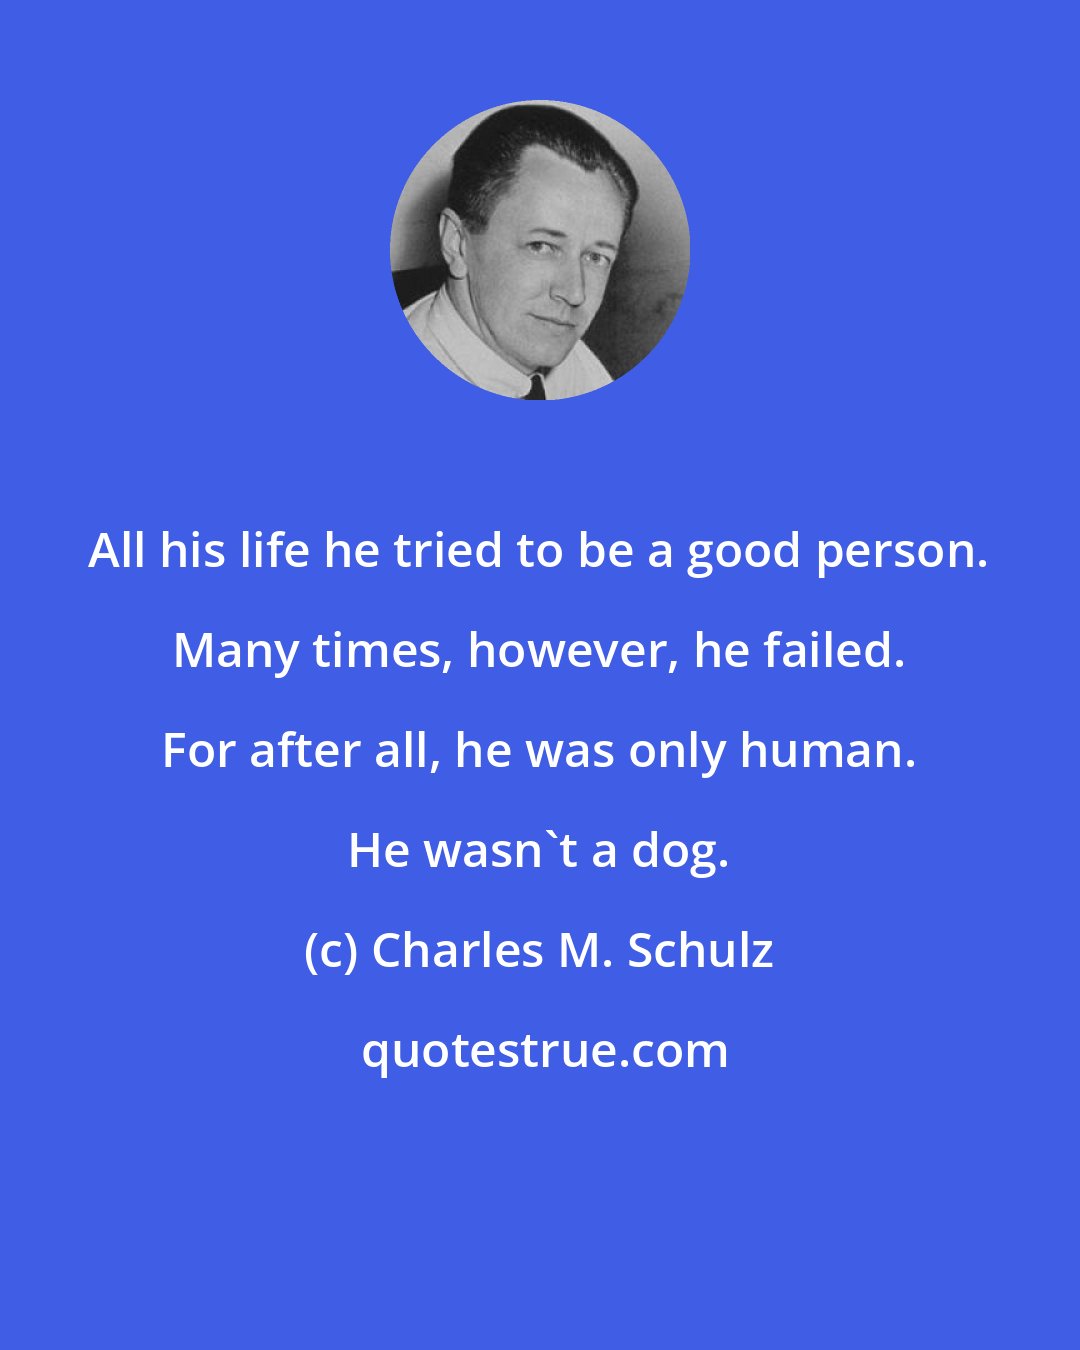 Charles M. Schulz: All his life he tried to be a good person. Many times, however, he failed. For after all, he was only human. He wasn't a dog.